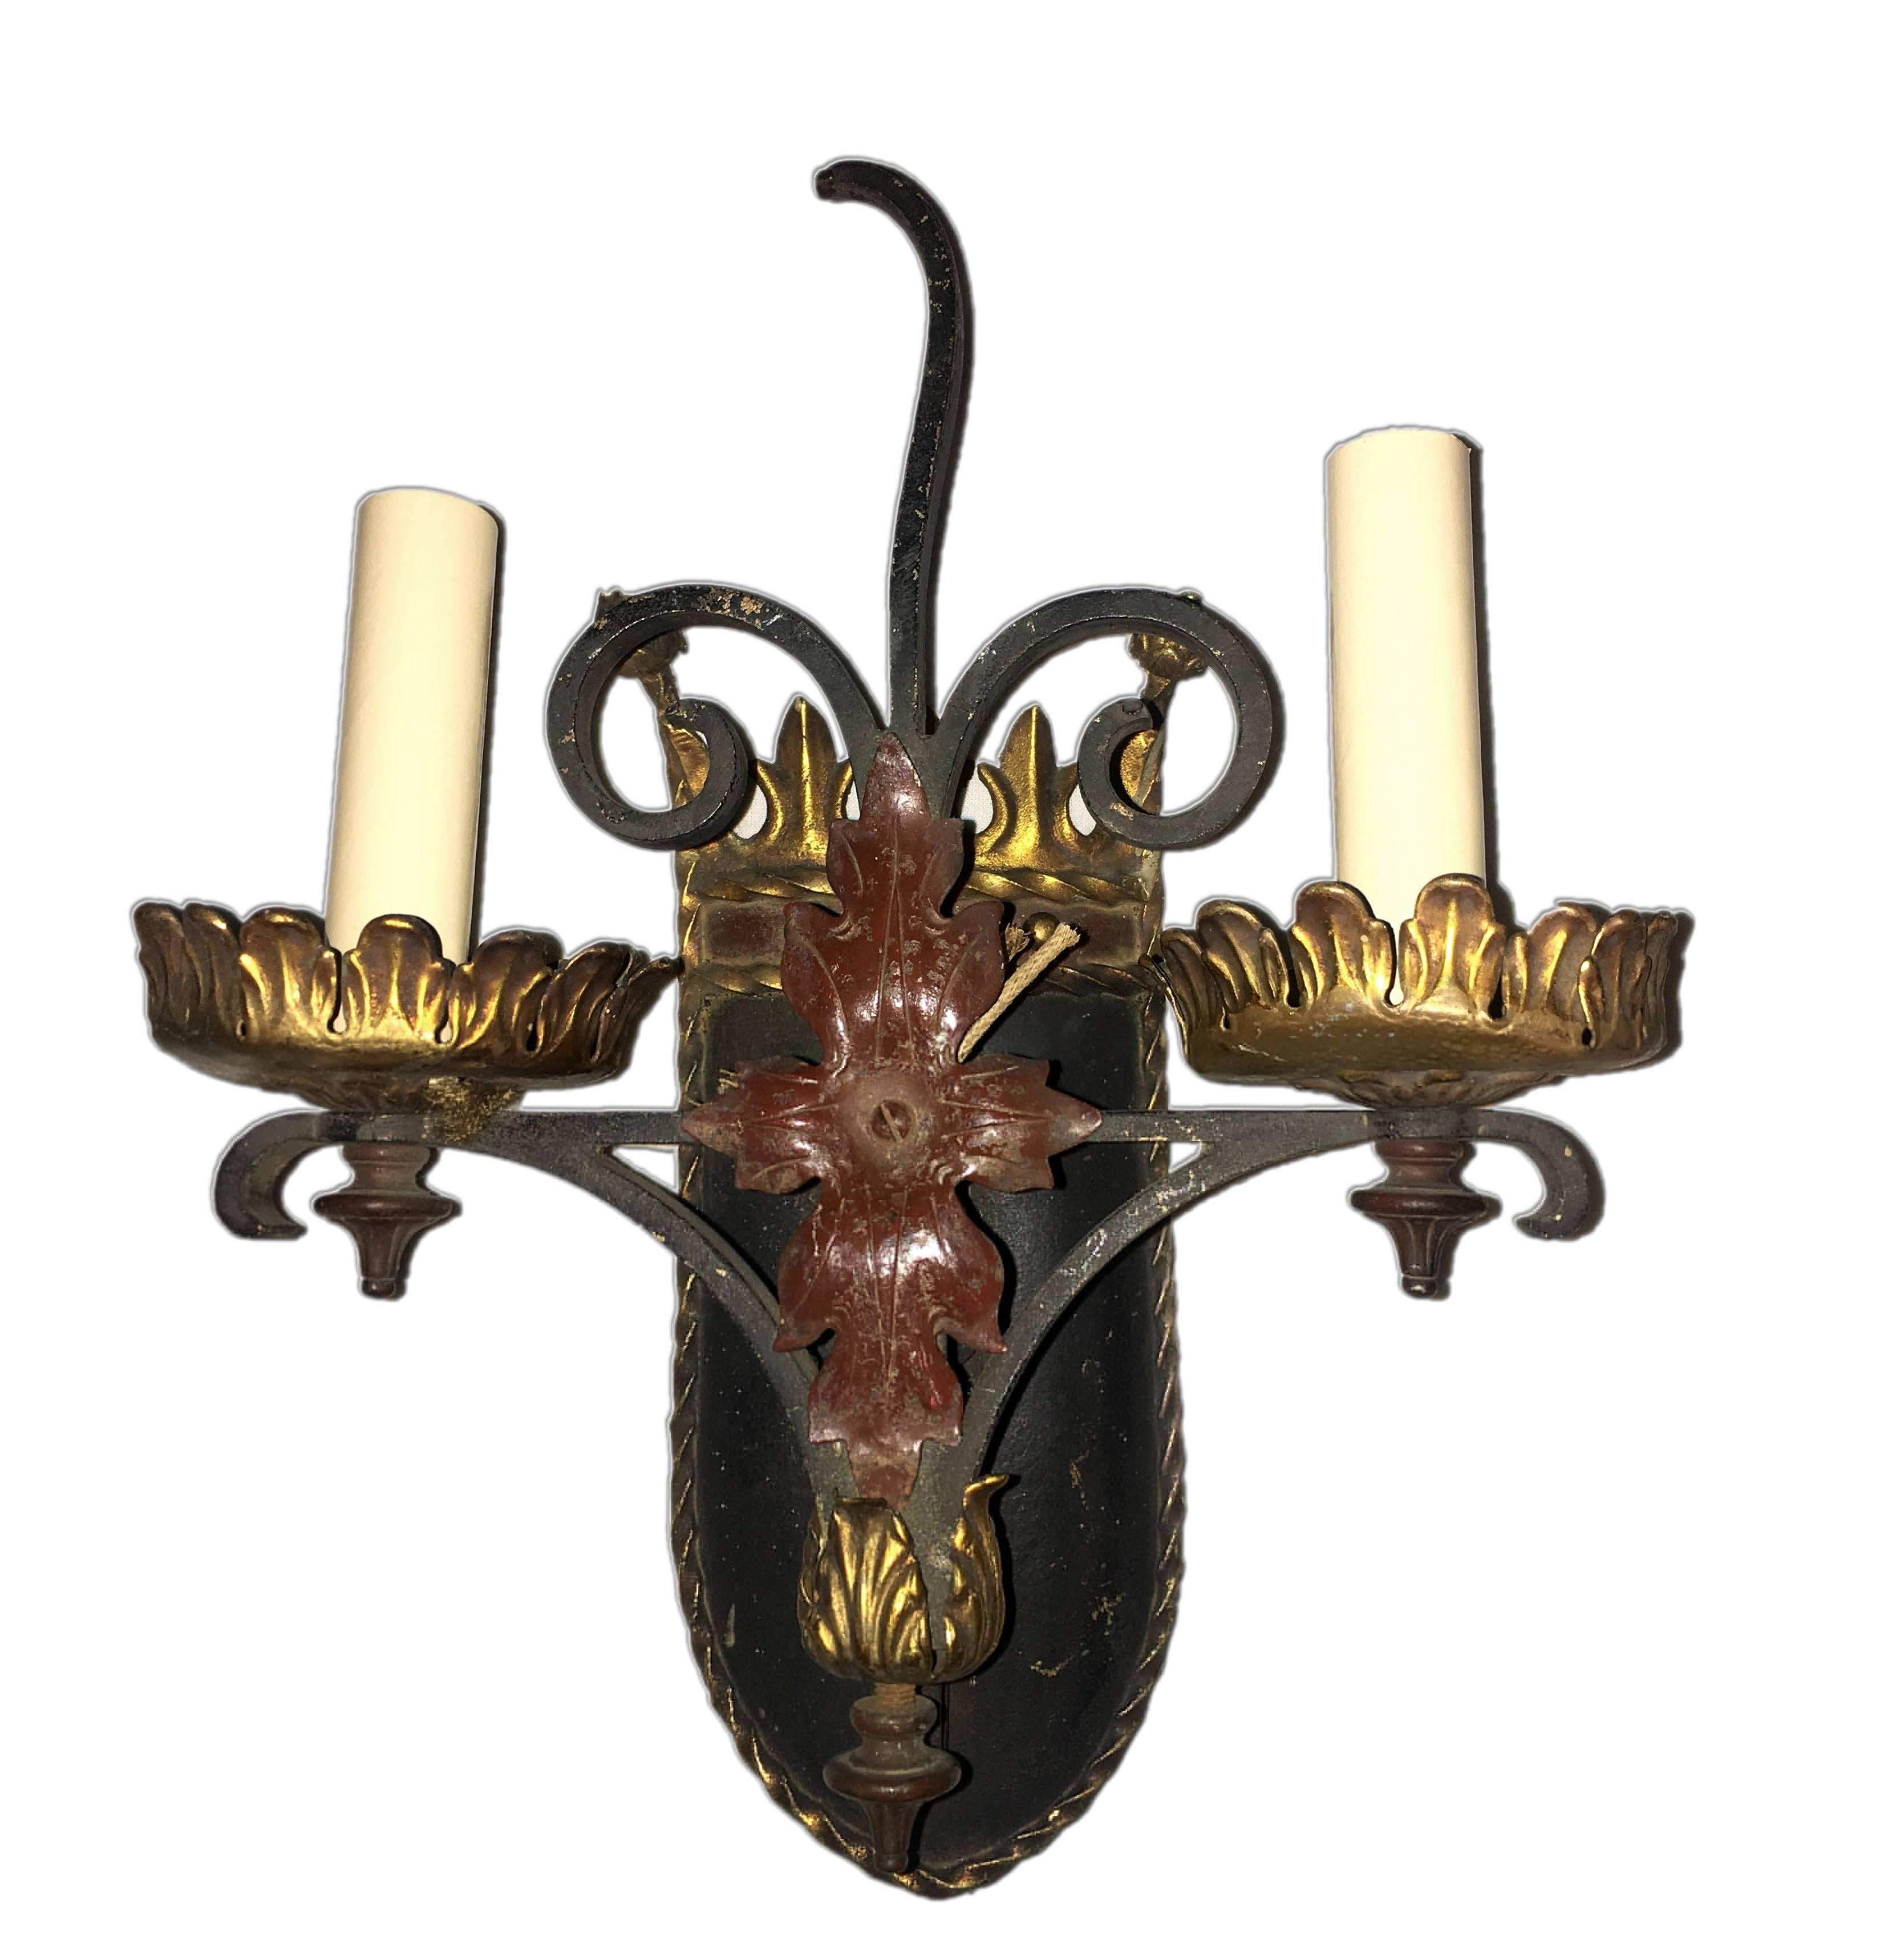 Pair of English circa 1940s hammered wrought iron sconces with painted and gilt finish.

Measurements:
Height 11.5